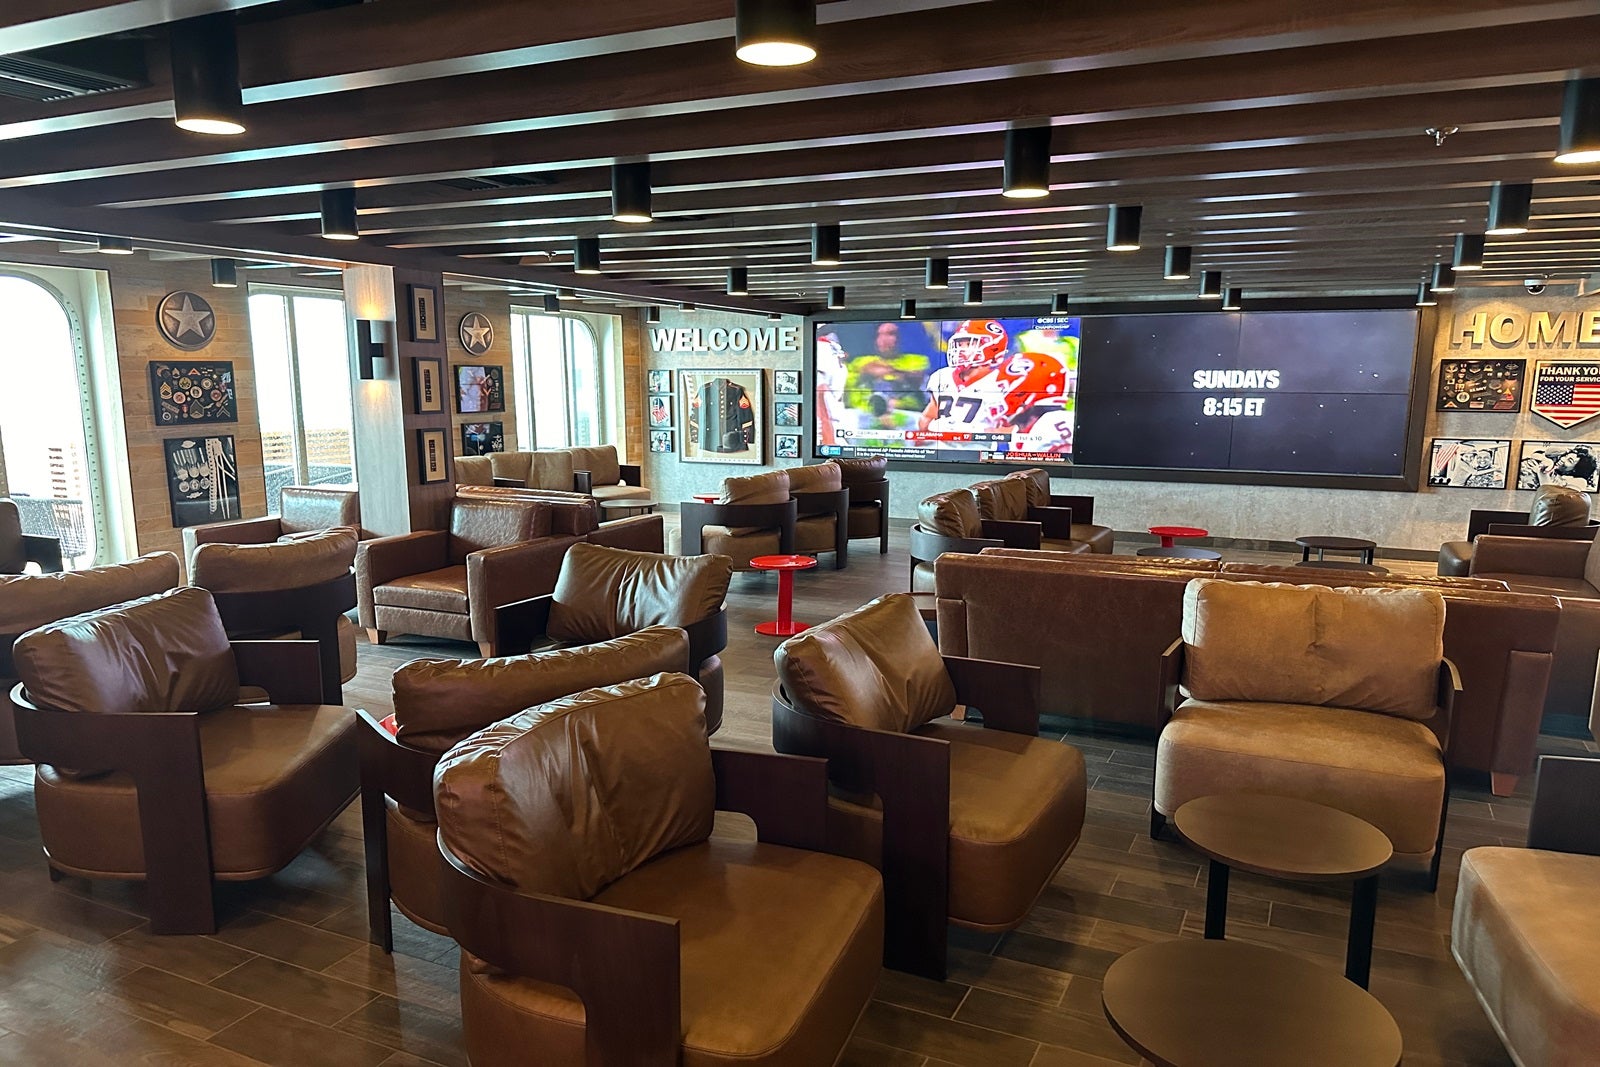 A cozy lounge with TVs, leather chairs and sofas, and miltary memorabilia